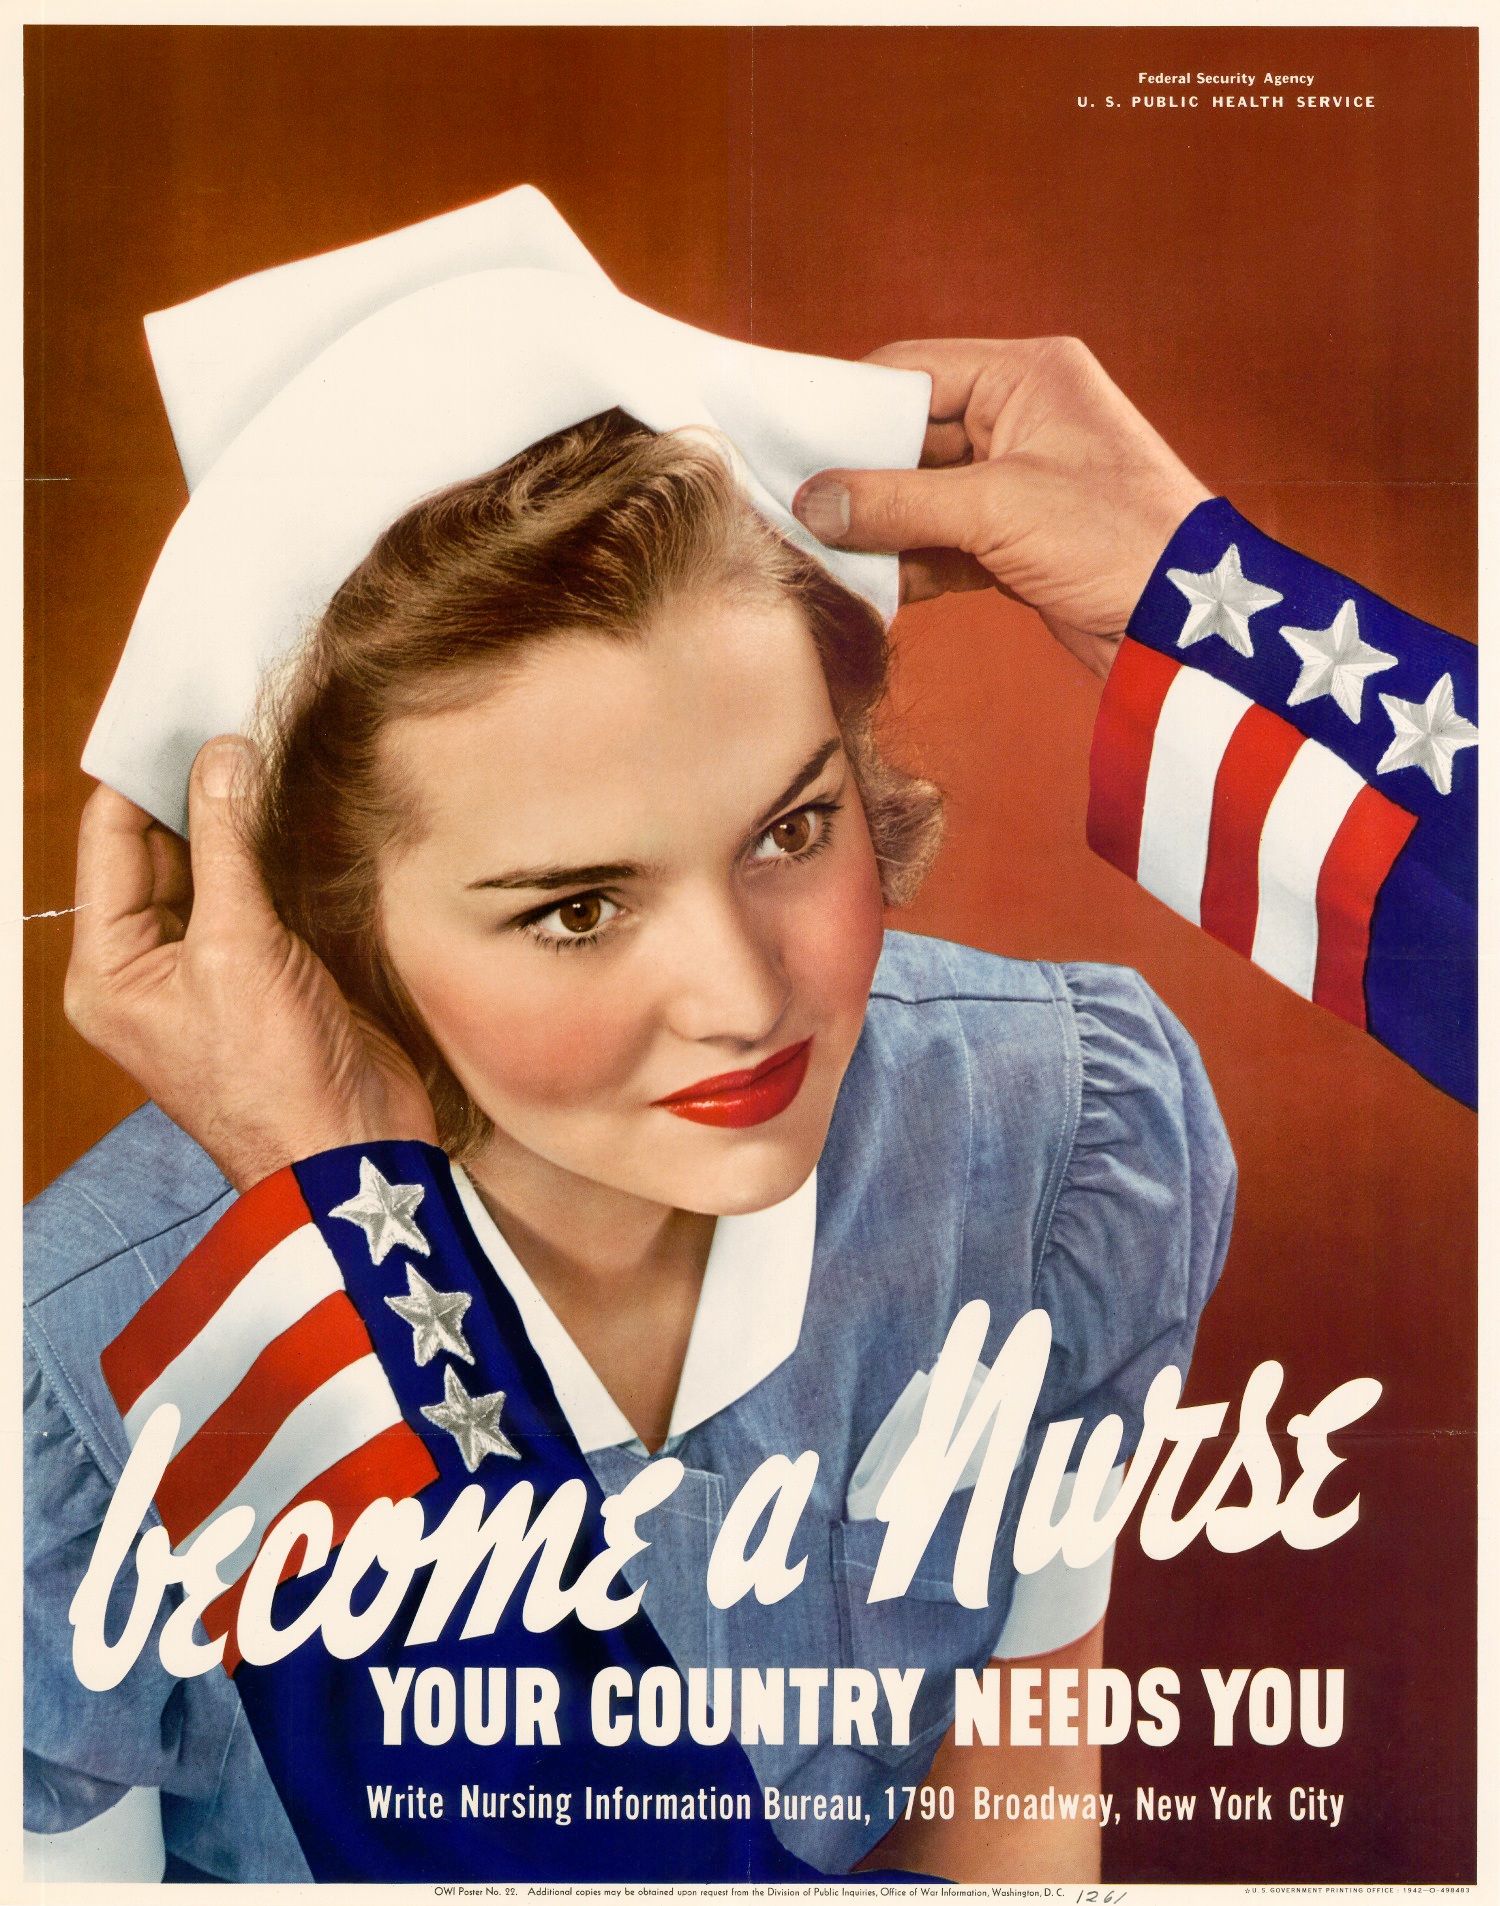 Become a Nurse: Your Country Needs You WWII Poster – Women of World War II